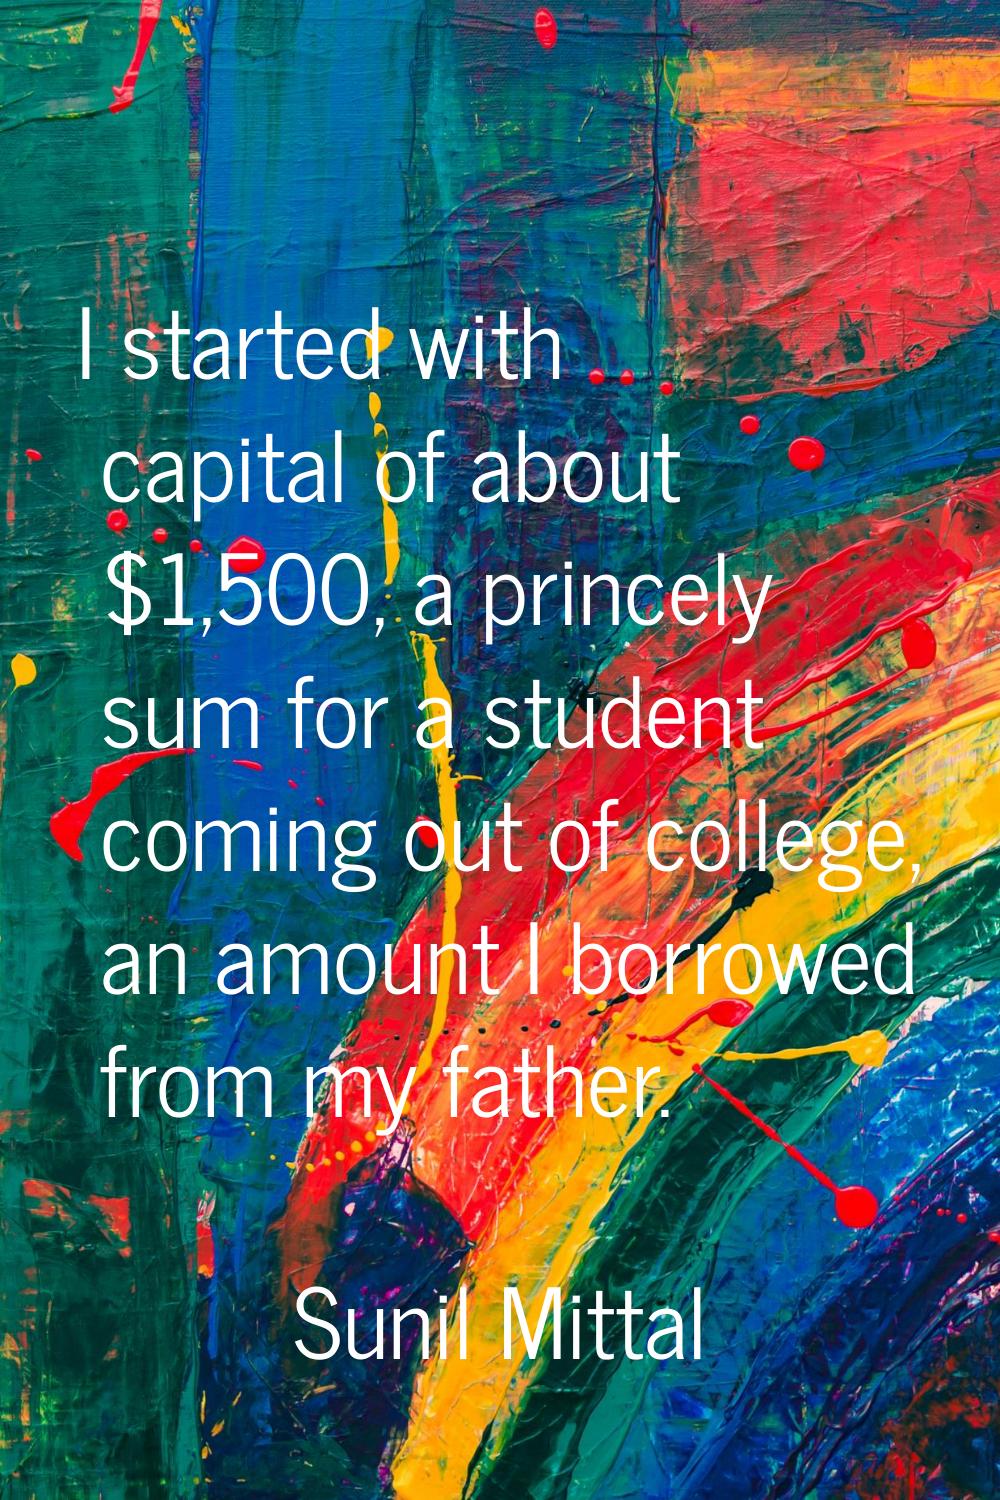 I started with capital of about $1,500, a princely sum for a student coming out of college, an amou